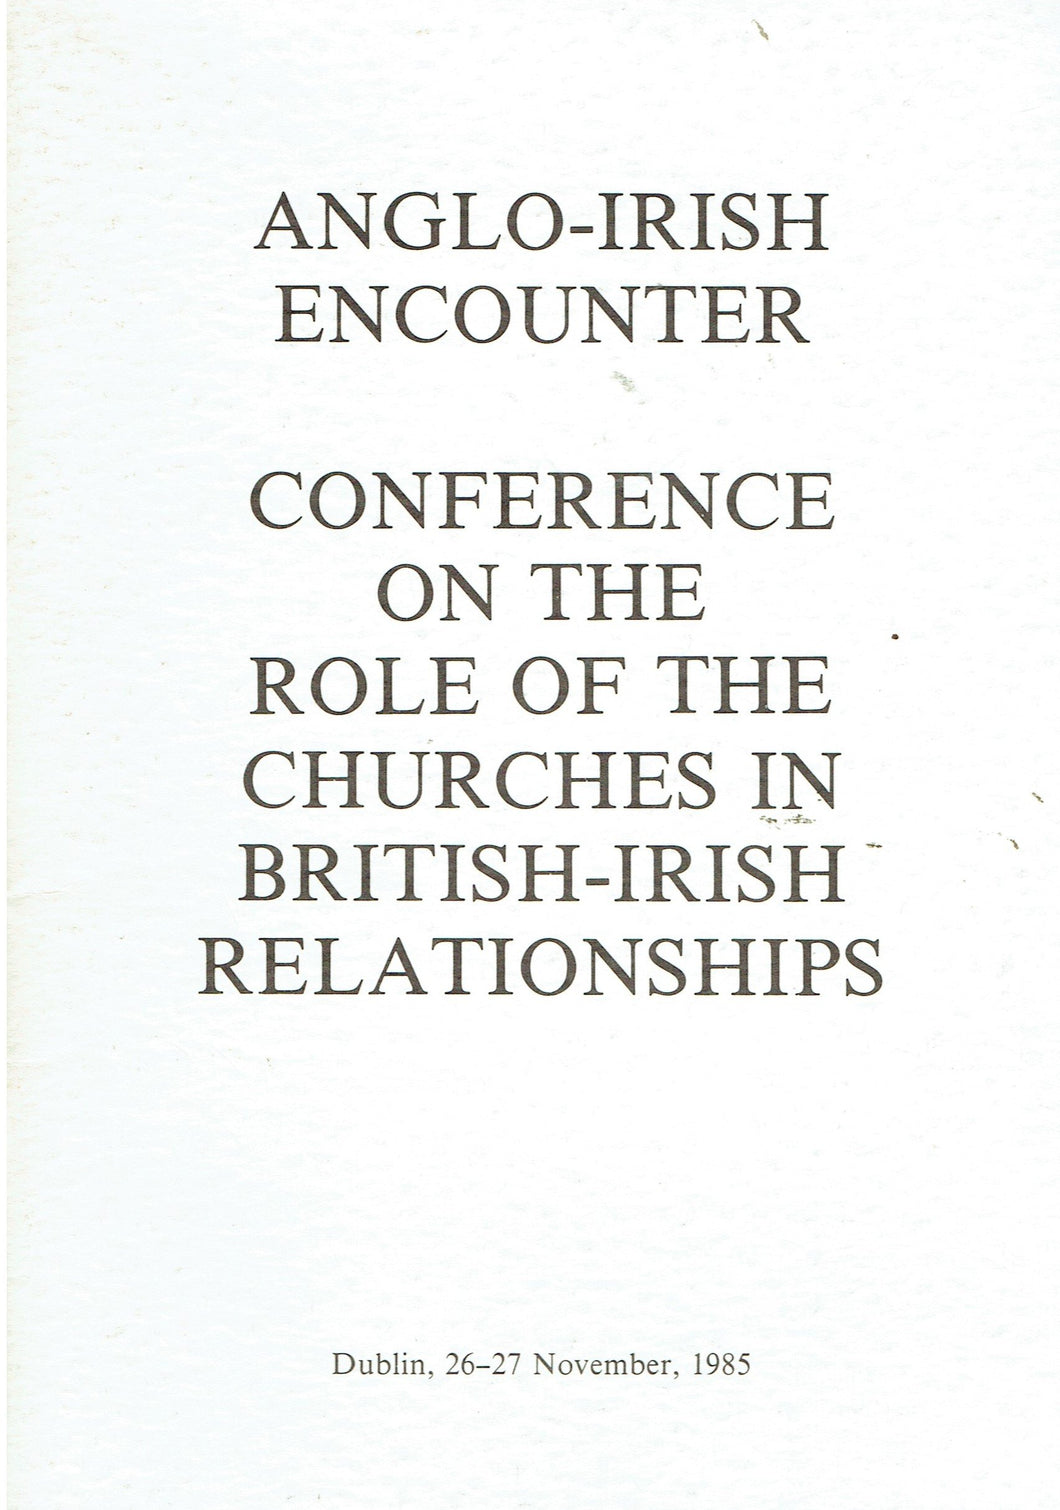 Anglo-Irish Encounter: Conference on the Role of the Churches in British-Irish Relationships, Dublin, 26-27 November, 1985